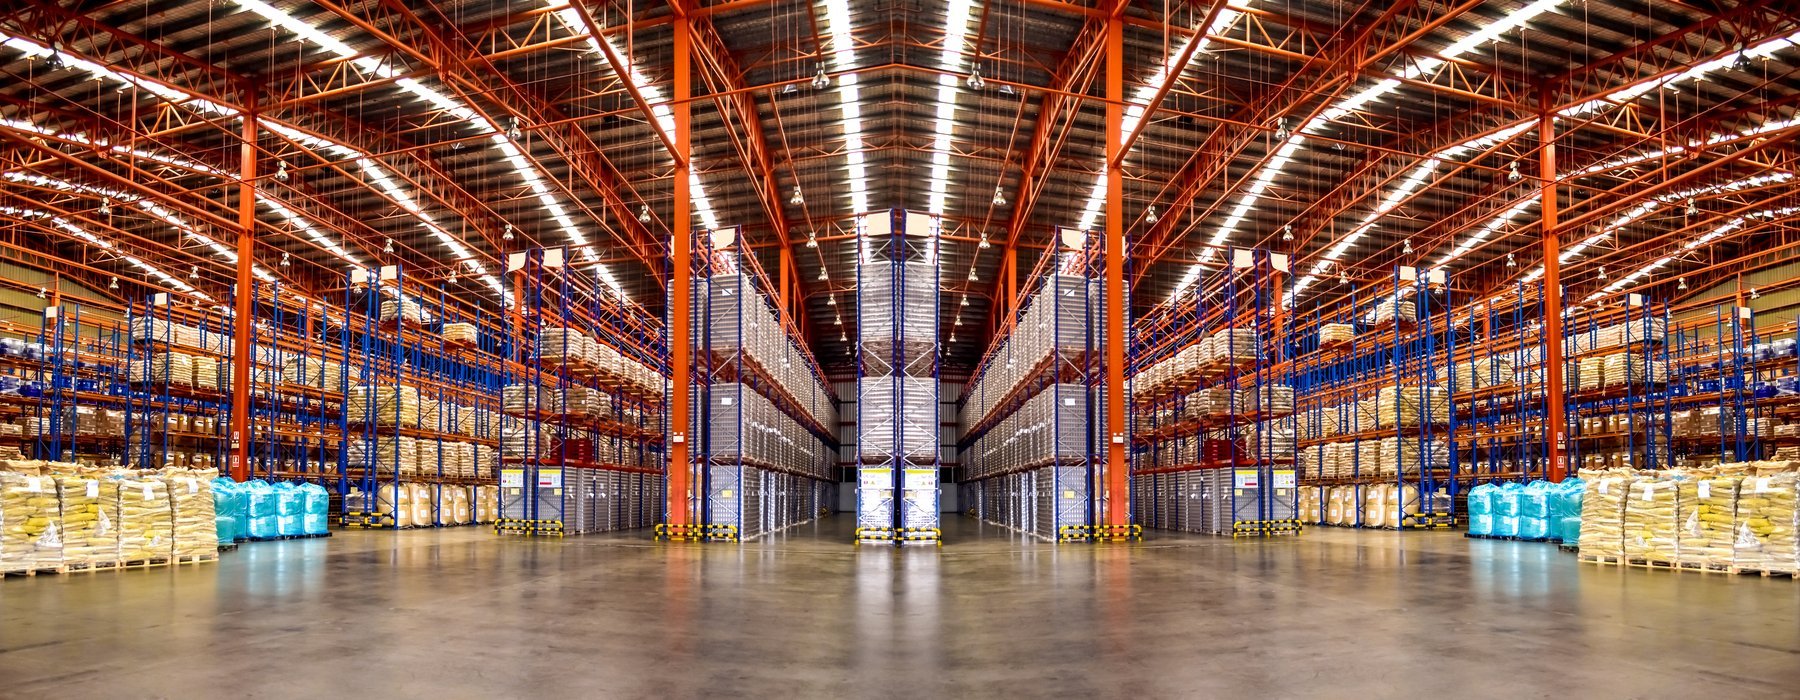 5 Competitive Advantages of Micro-Fulfillment Centers